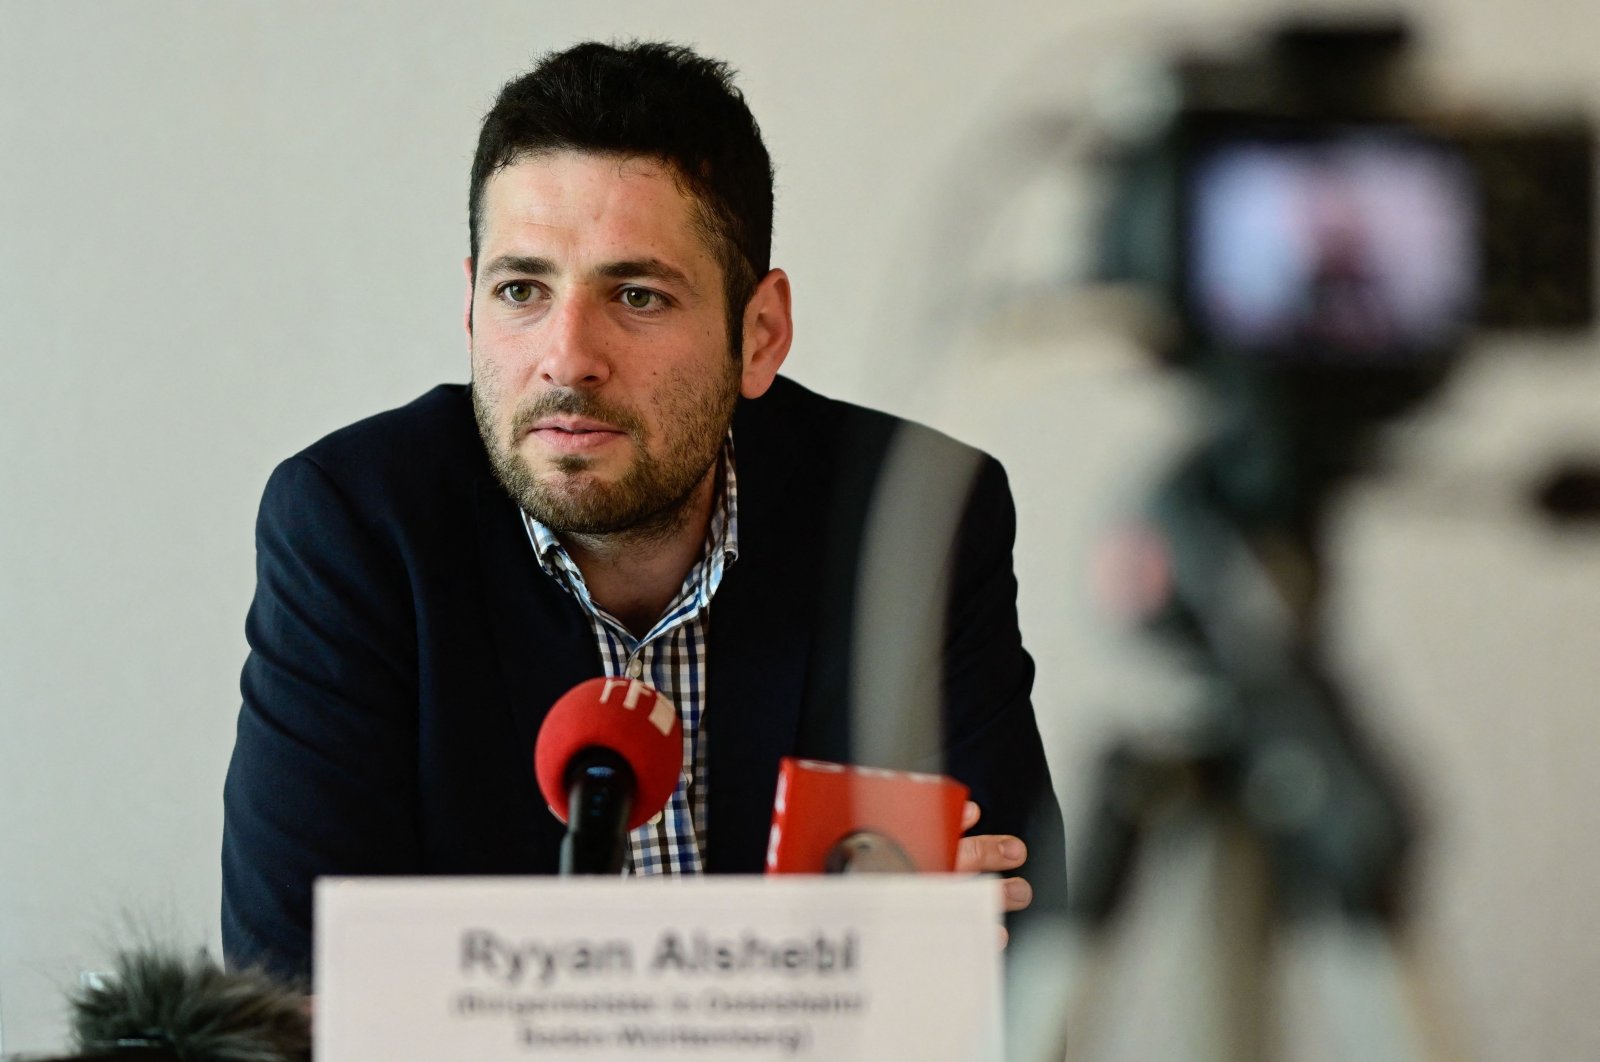 Ryyan Alshebl, mayor of the community of Ostelsheim in Baden-Wuerttemberg, southwestern Germany, addresses a press talk with the Association of the Foreign Press in Germany (VAP) in Berlin, Germany, May 30, 2023. (AFP Photo)